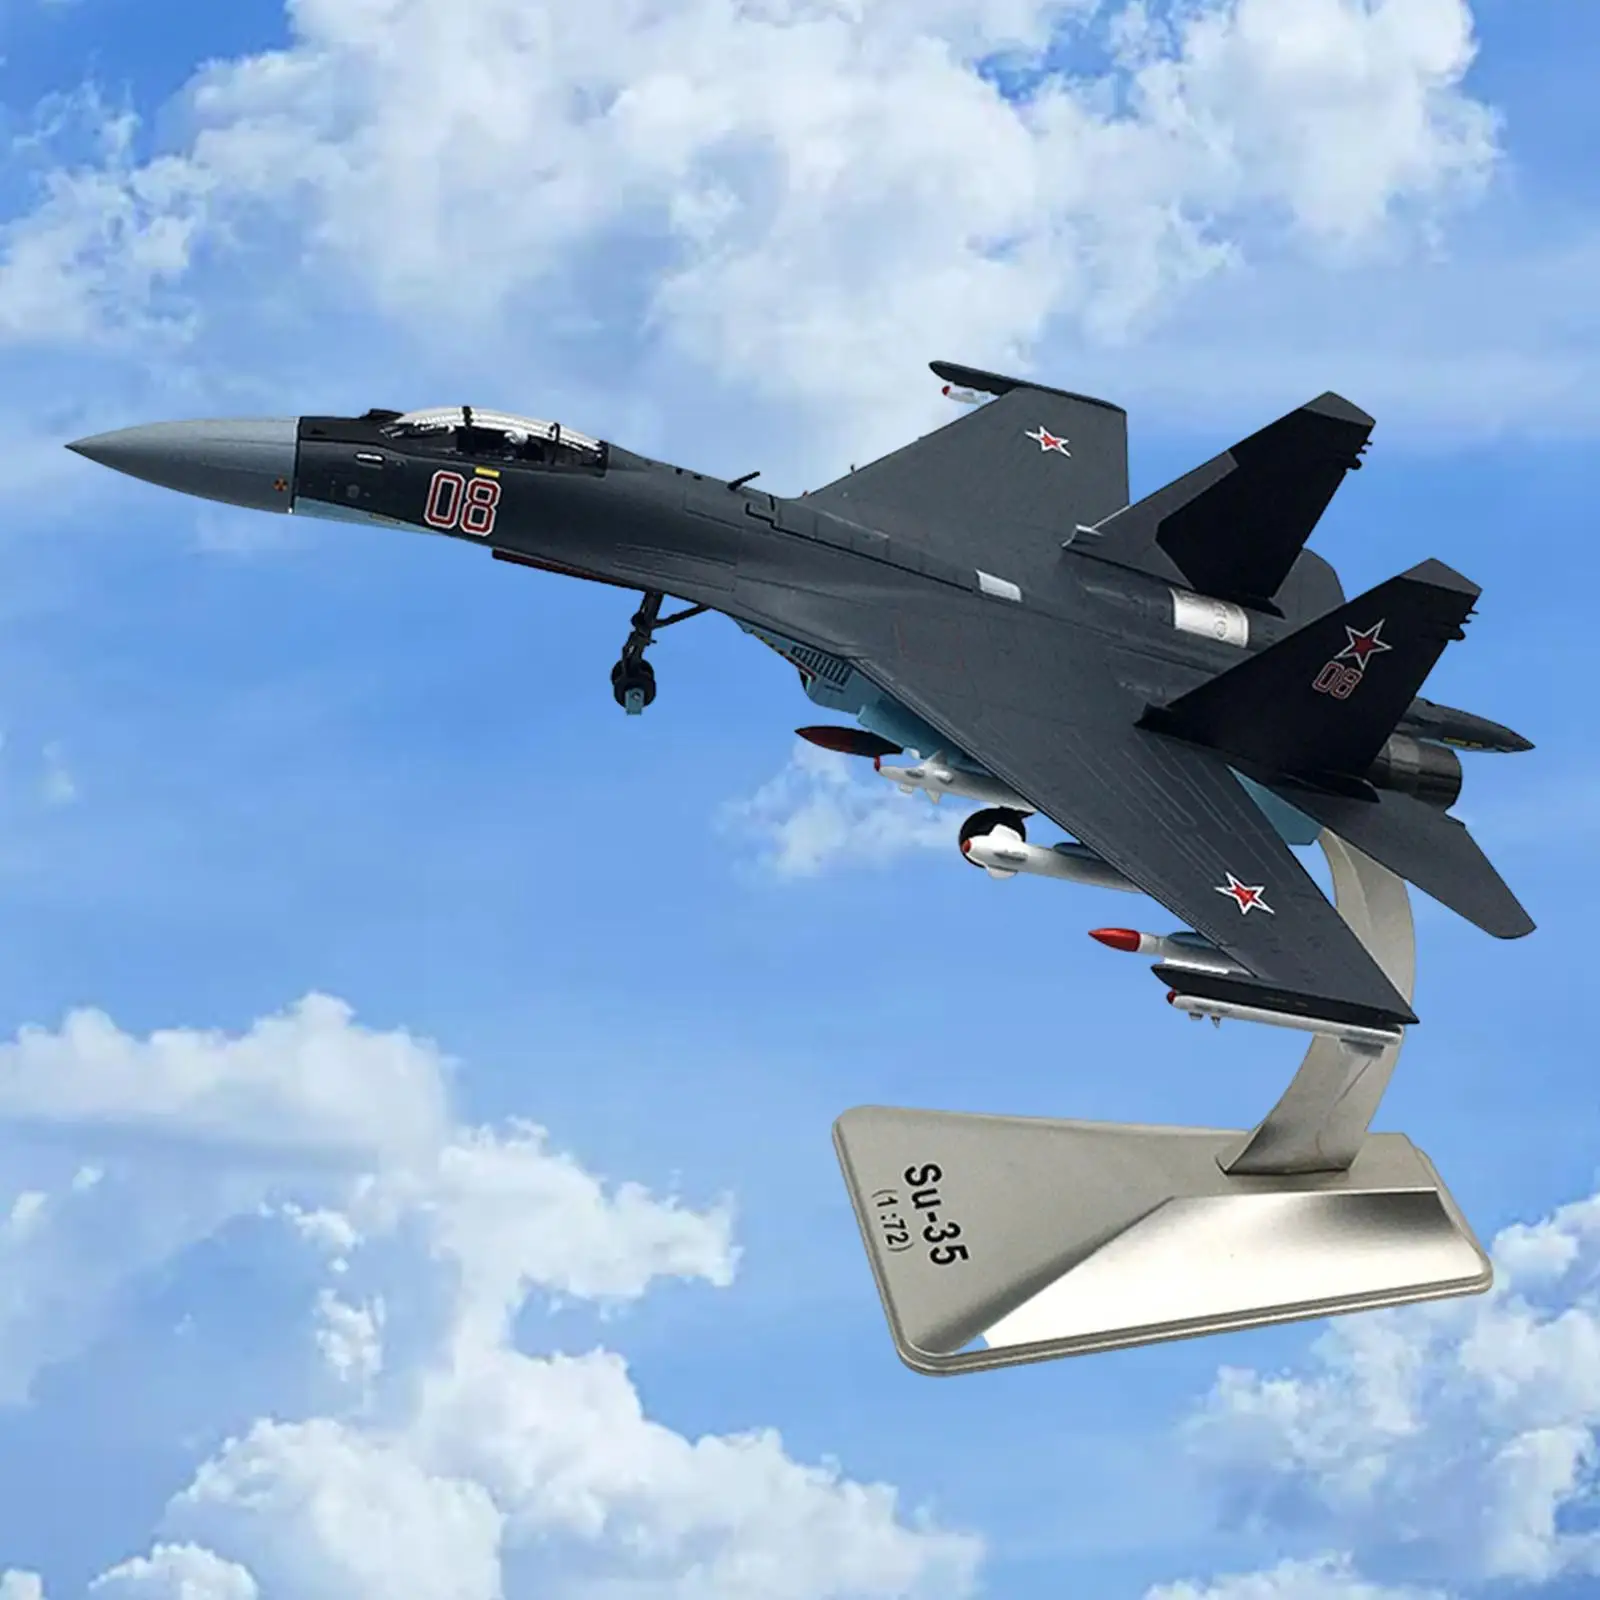 1:72 Scale  SU-35   Models Simulation  Toy Birthday Party Favors Office Decor Diecast Plane Model Kids 